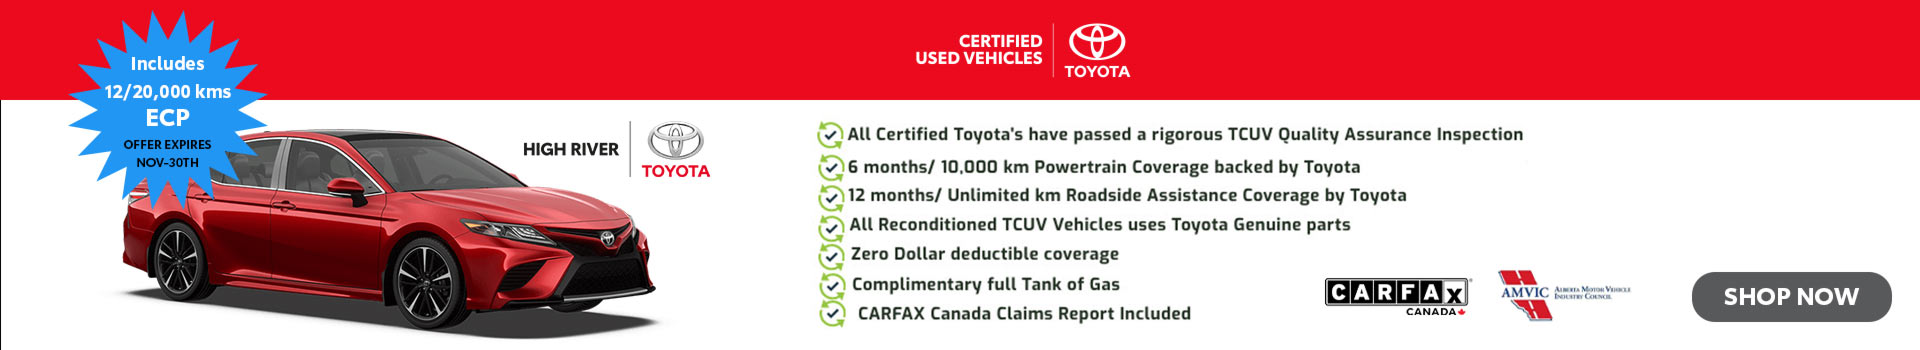 High River Toyota Certified Used Vehicles